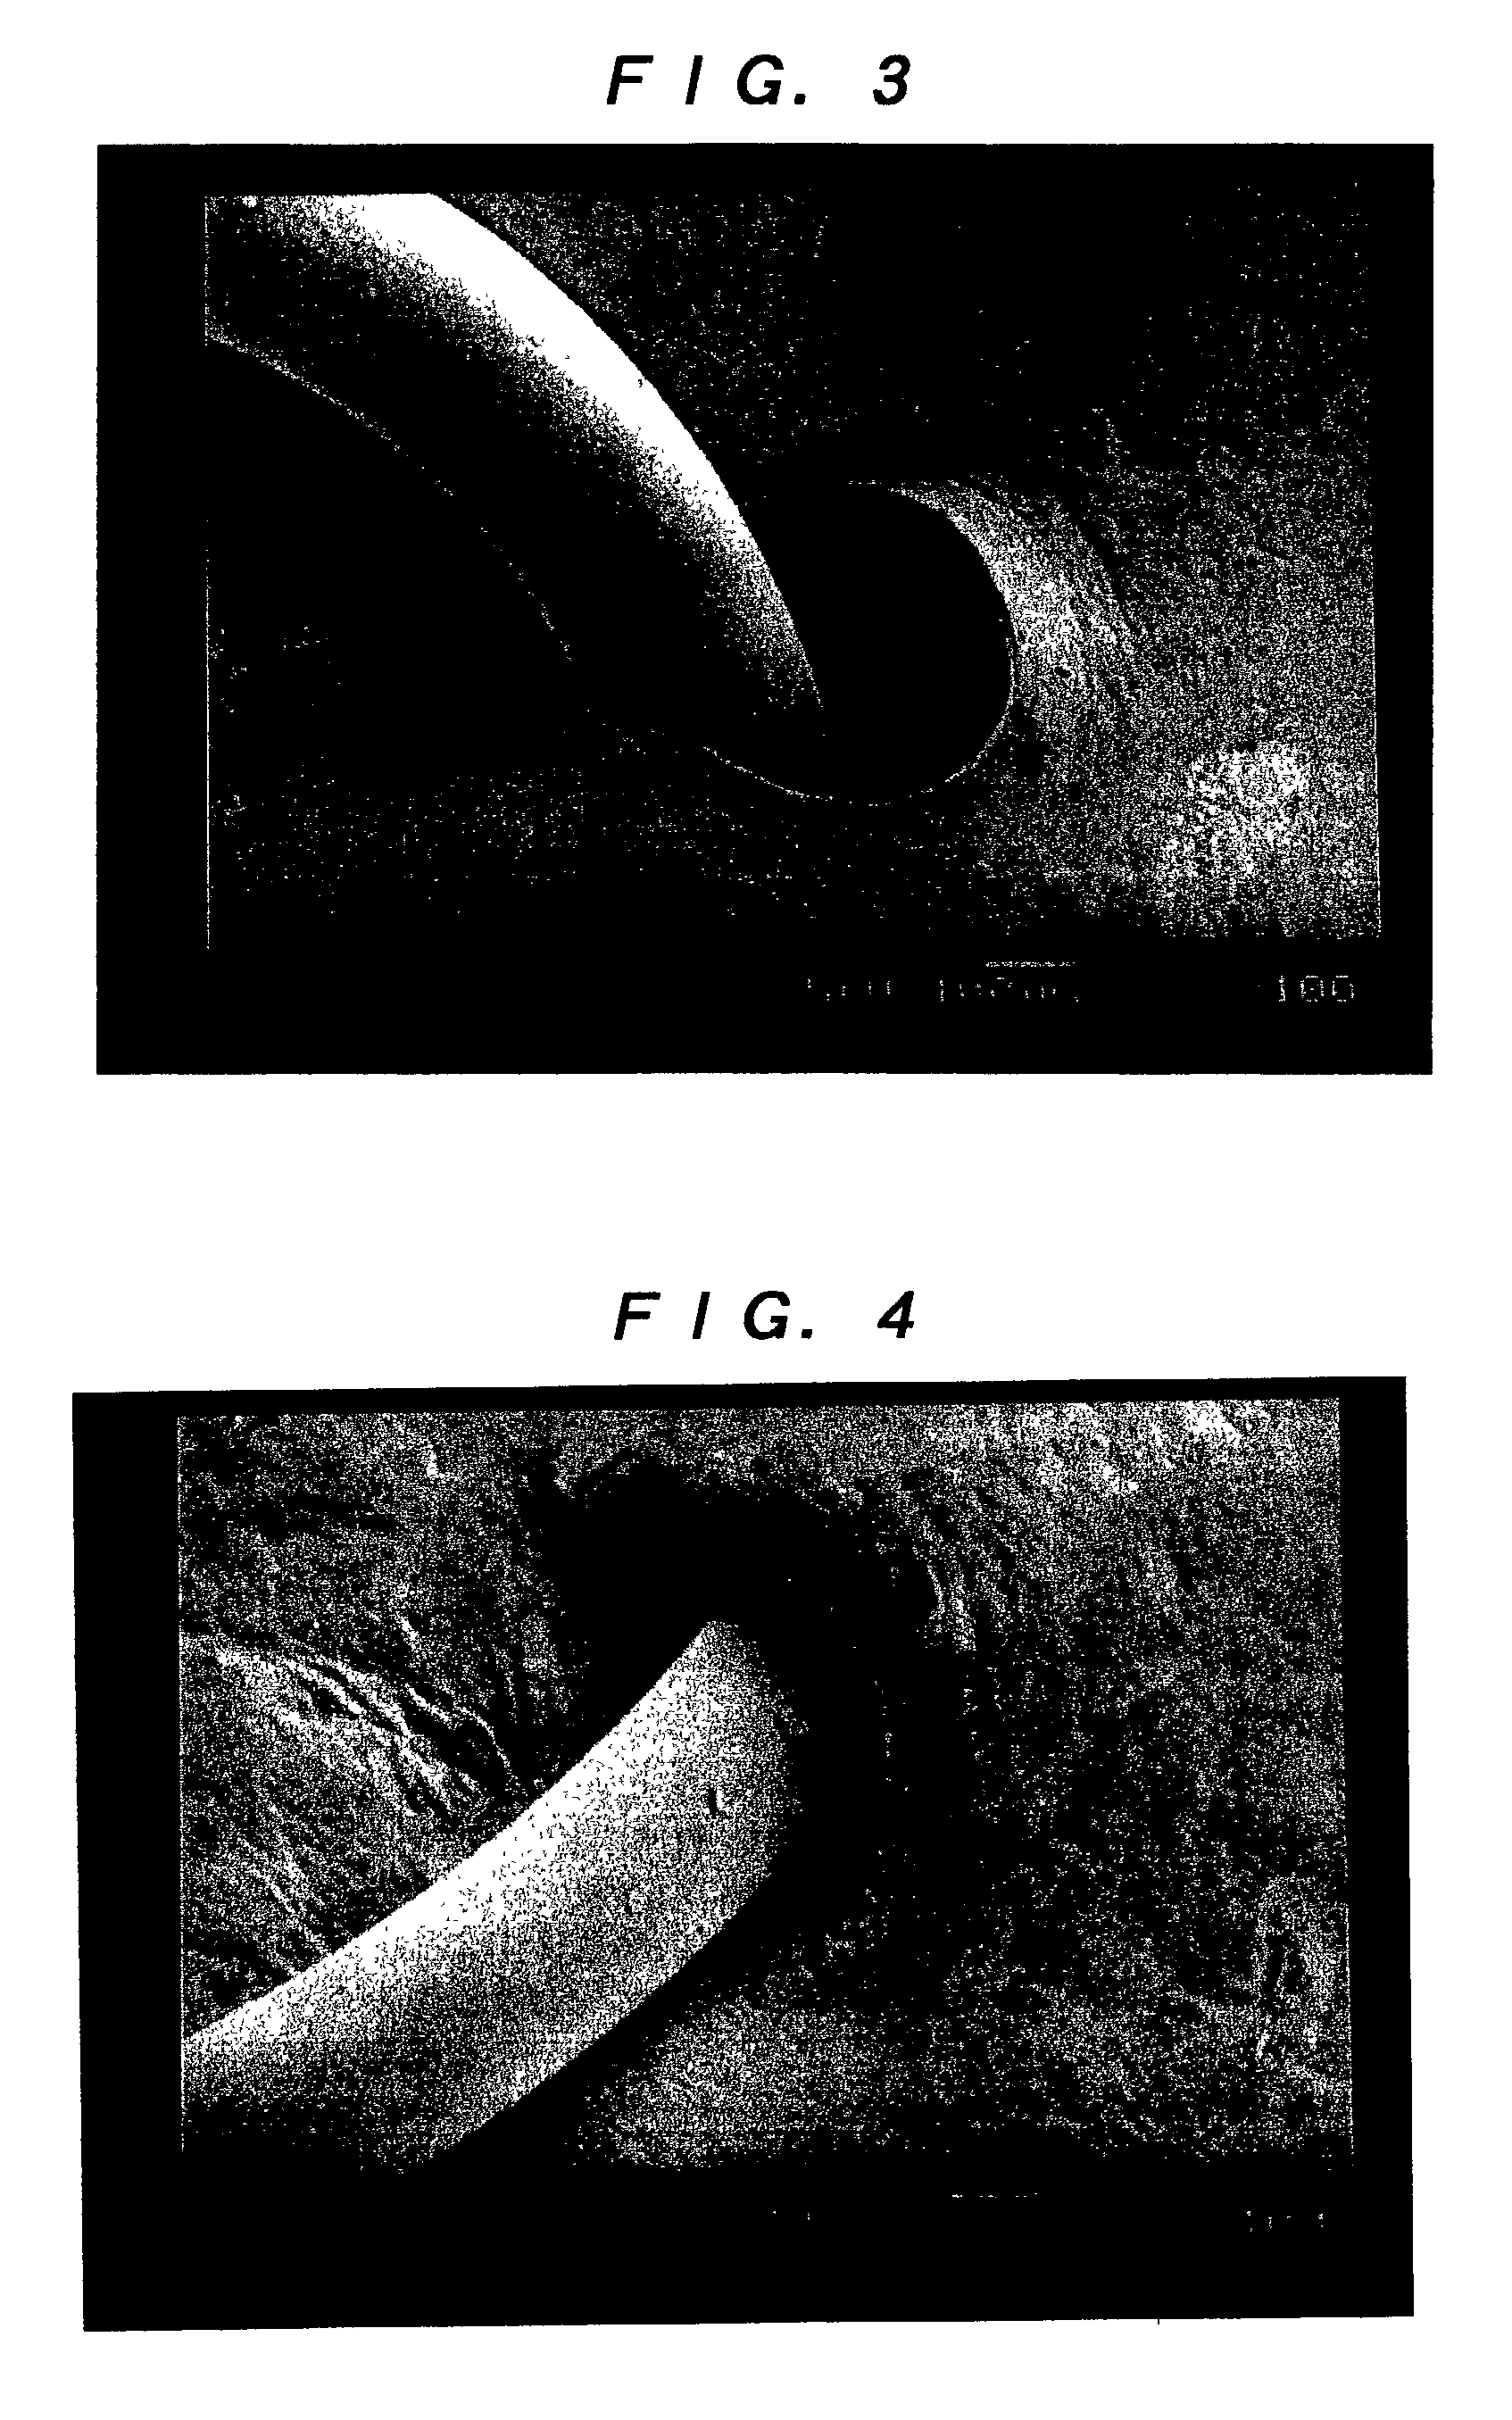 Artificial dura mater and process for producing dura mater